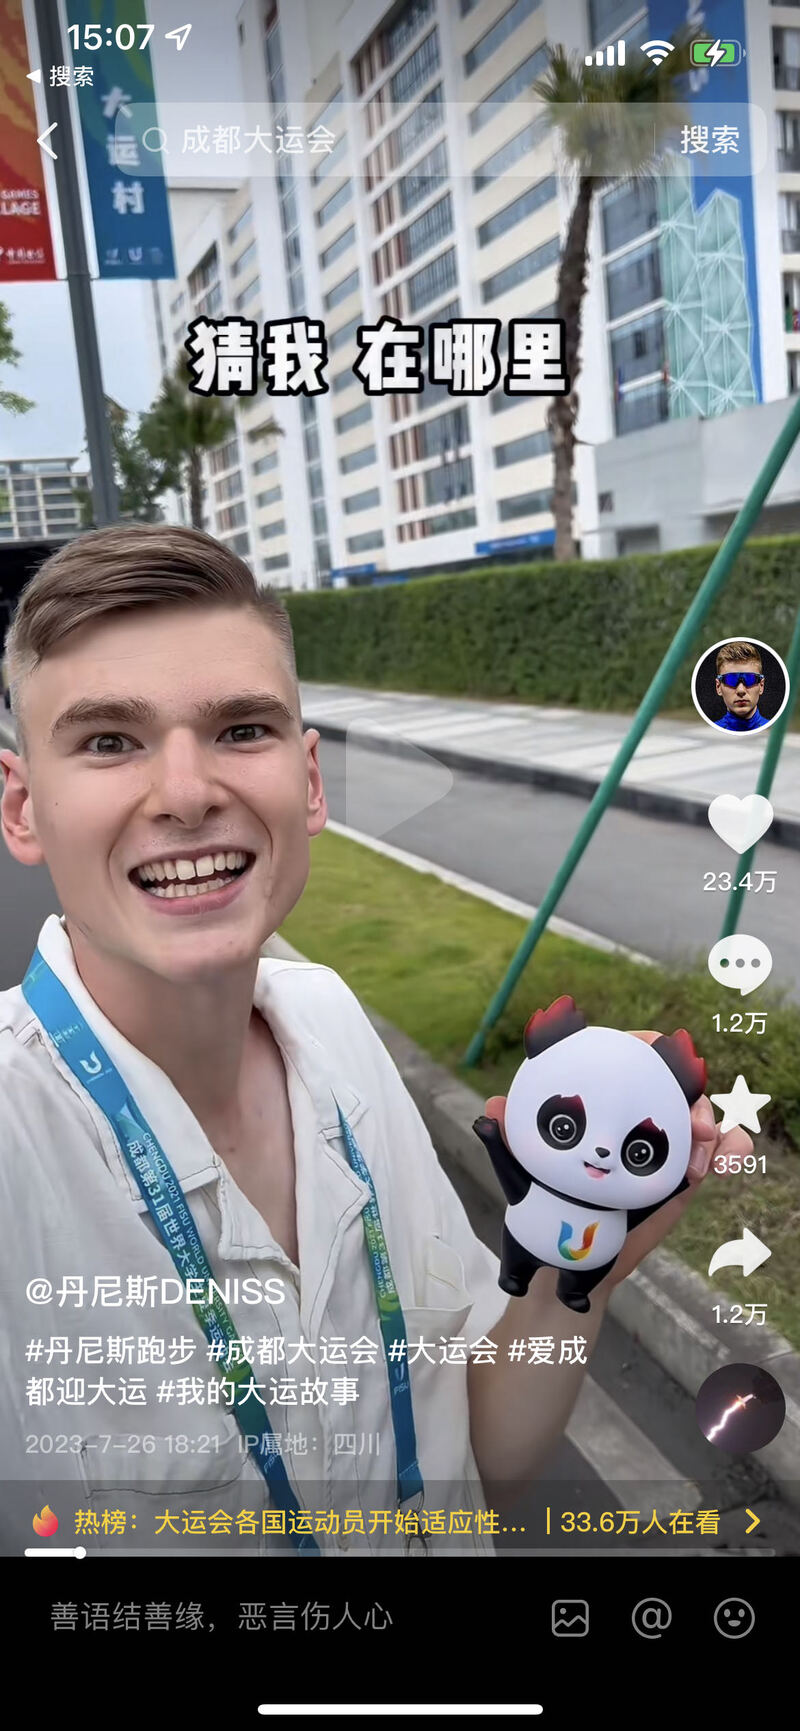 Athletes from various countries on and off the field share their "Chinese sentiment", and everyone loves the feeling of the Universiade | Chengdu | Universiade